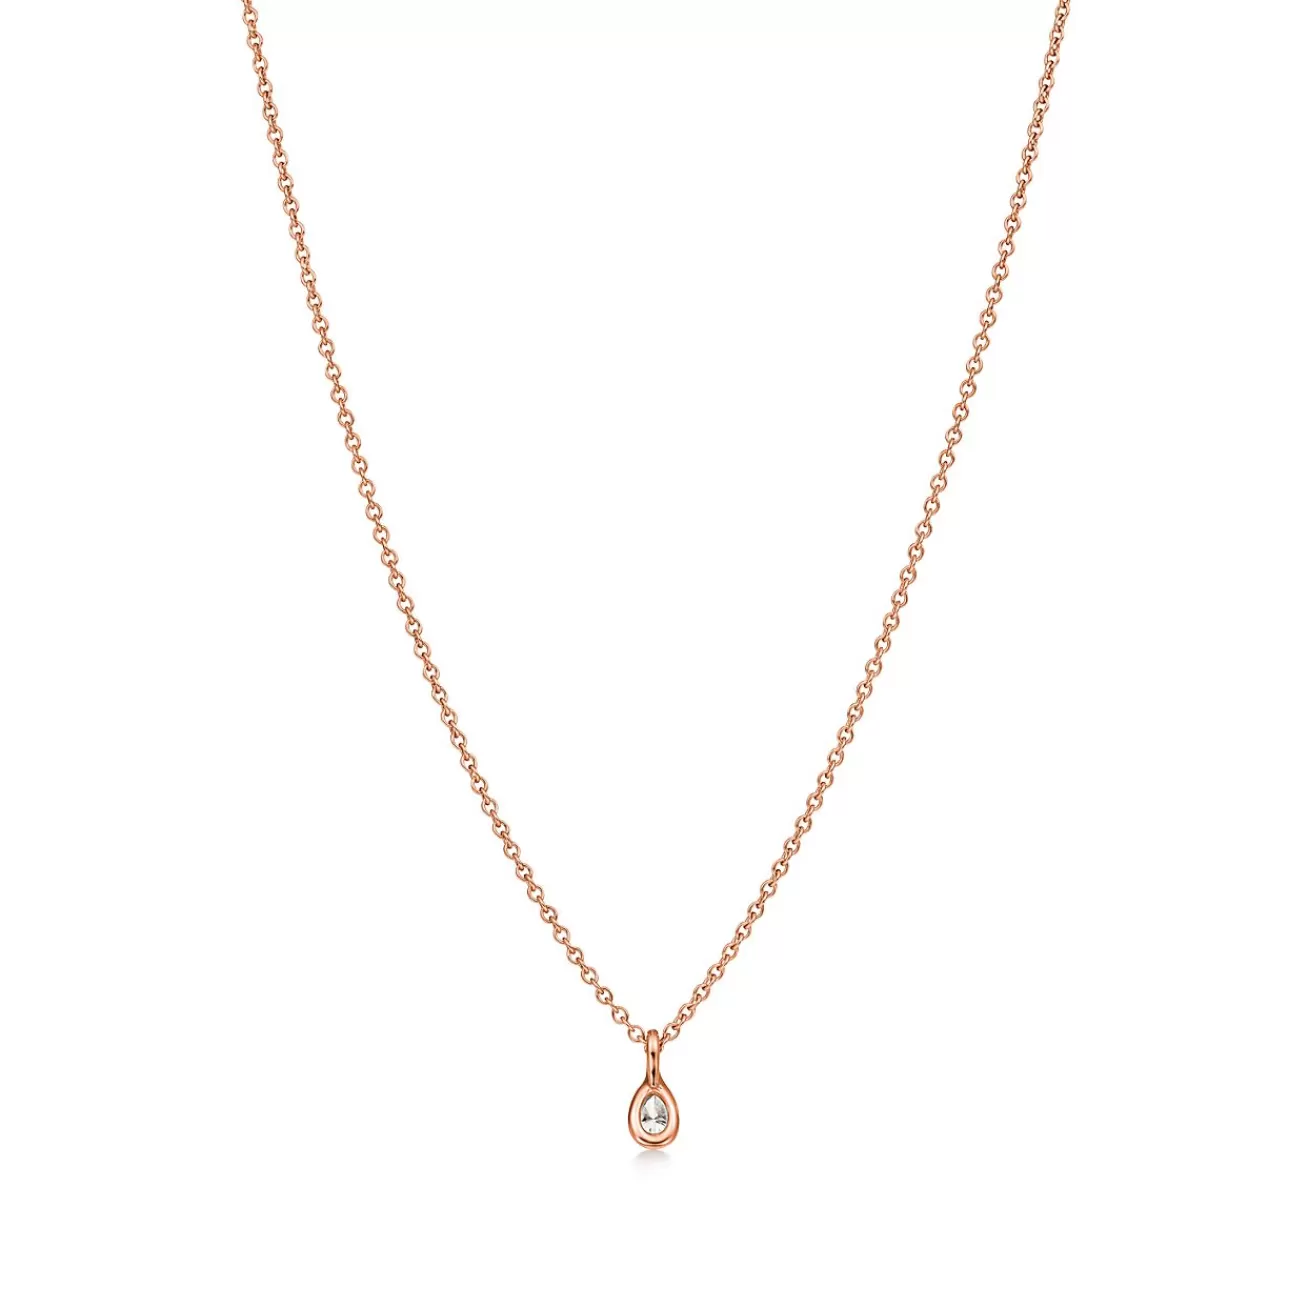 Tiffany & Co. Elsa Peretti® Diamonds by the Yard® pendant in 18k rose gold with a pear-shaped diamond. | ^ Necklaces & Pendants | Rose Gold Jewelry